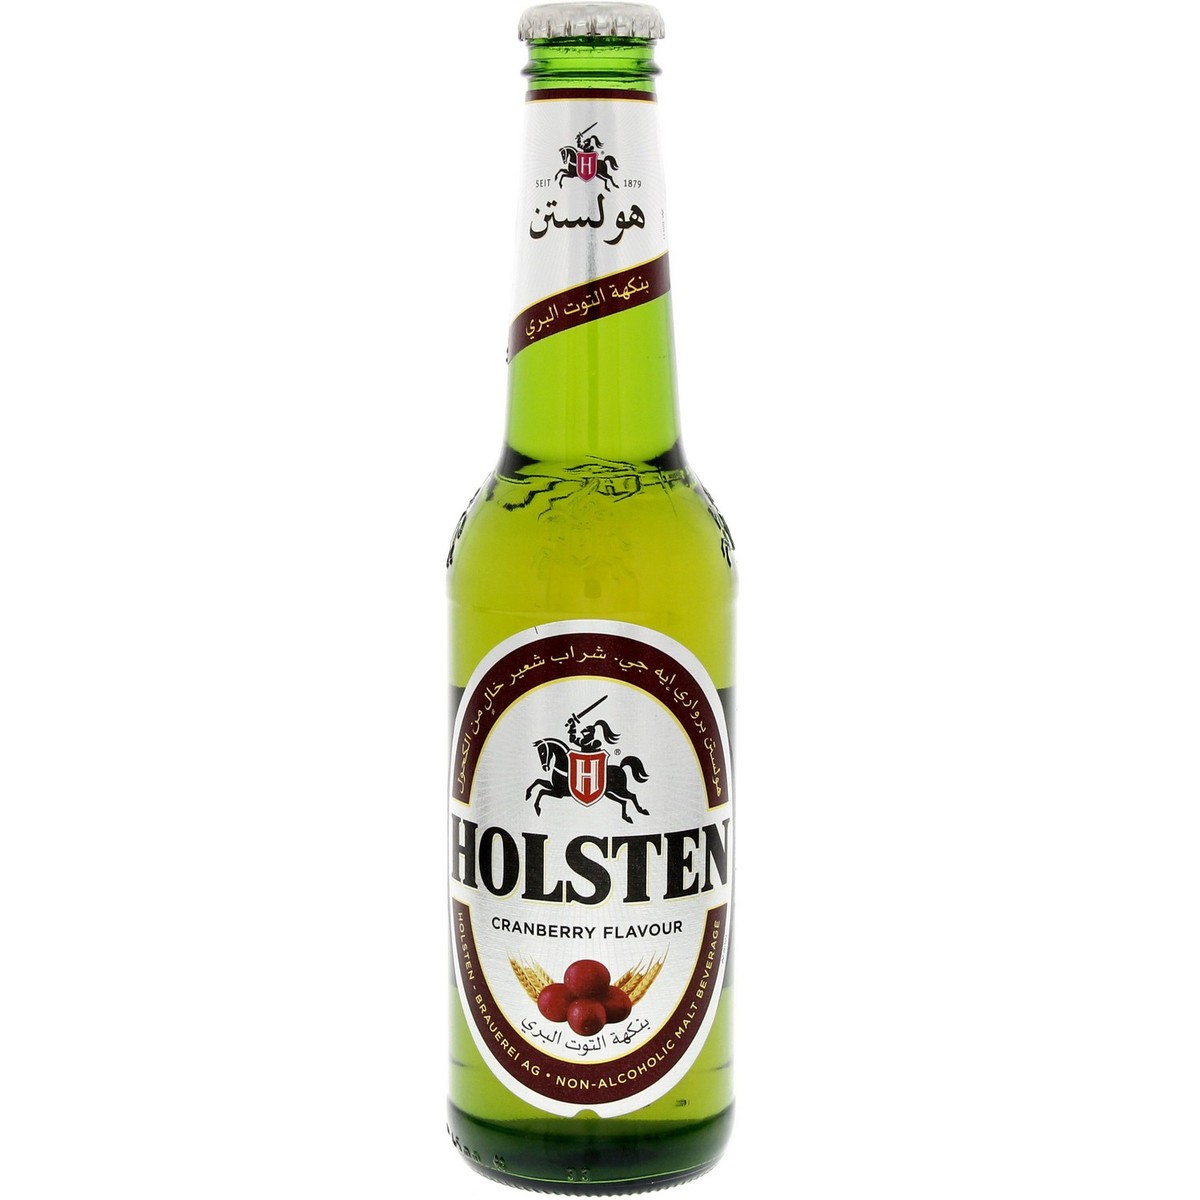 Holsten Cranberry Flavour Non Alcoholic Beer 330 ml